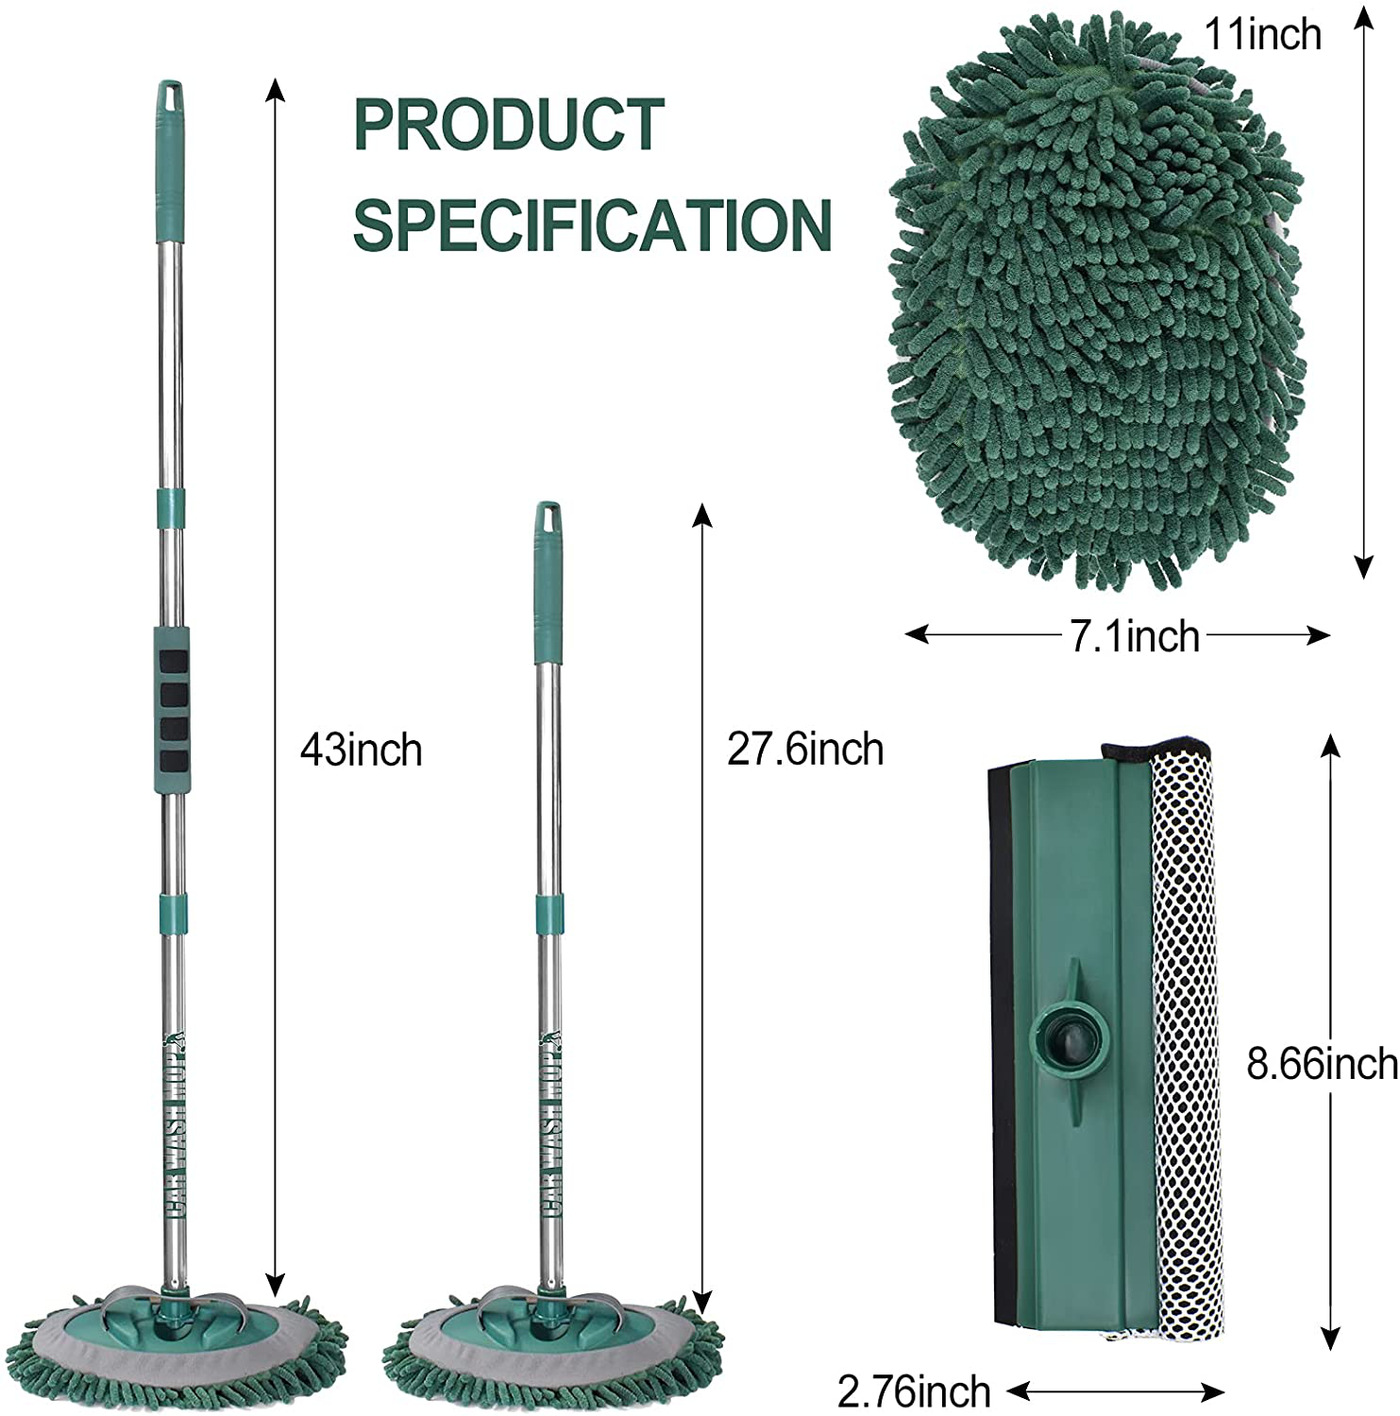 AgiiMan Car Wash Brush with Long Handle - 3 in 1 Car Cleaning Mop, Chenille Microfiber Mitt Set, Adjustable Length 24in-43in Glass Scrabber Vehicle Cleaner Kit, Green